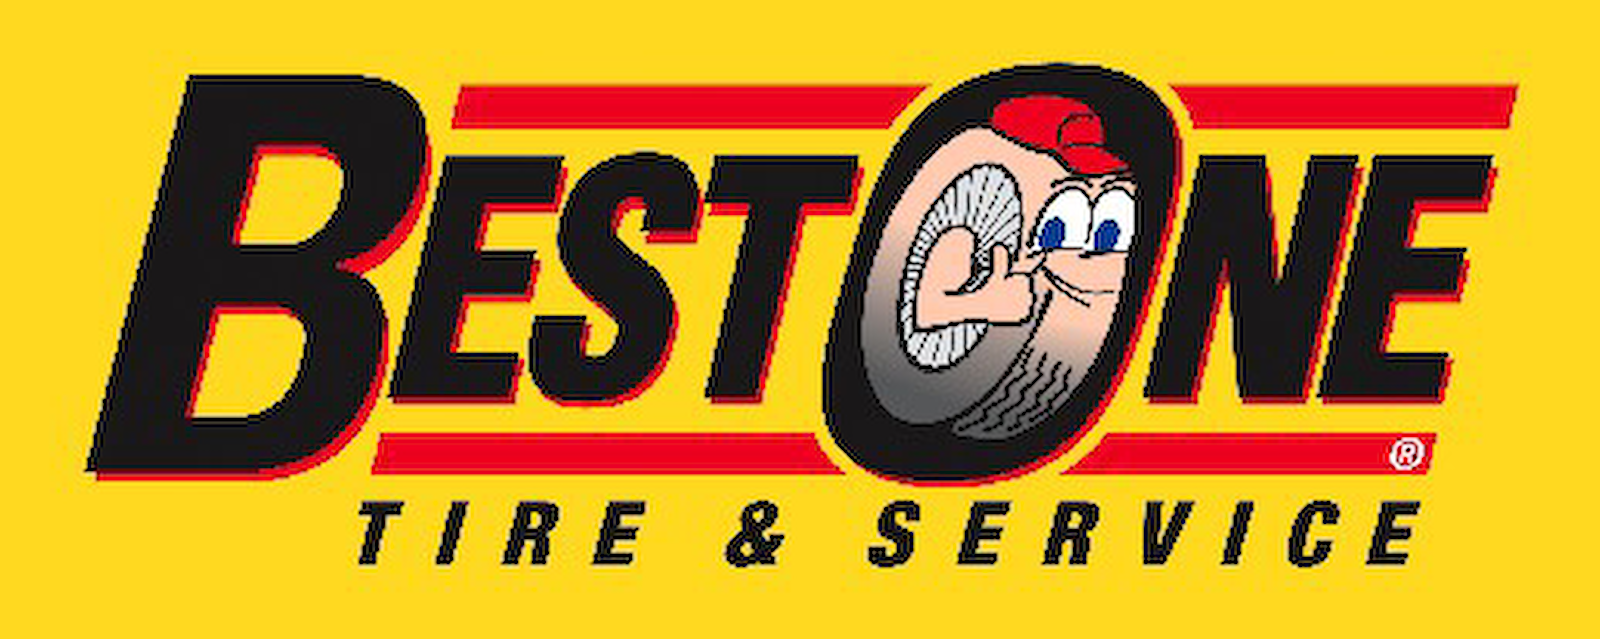 Best One Tire & Service of Upland